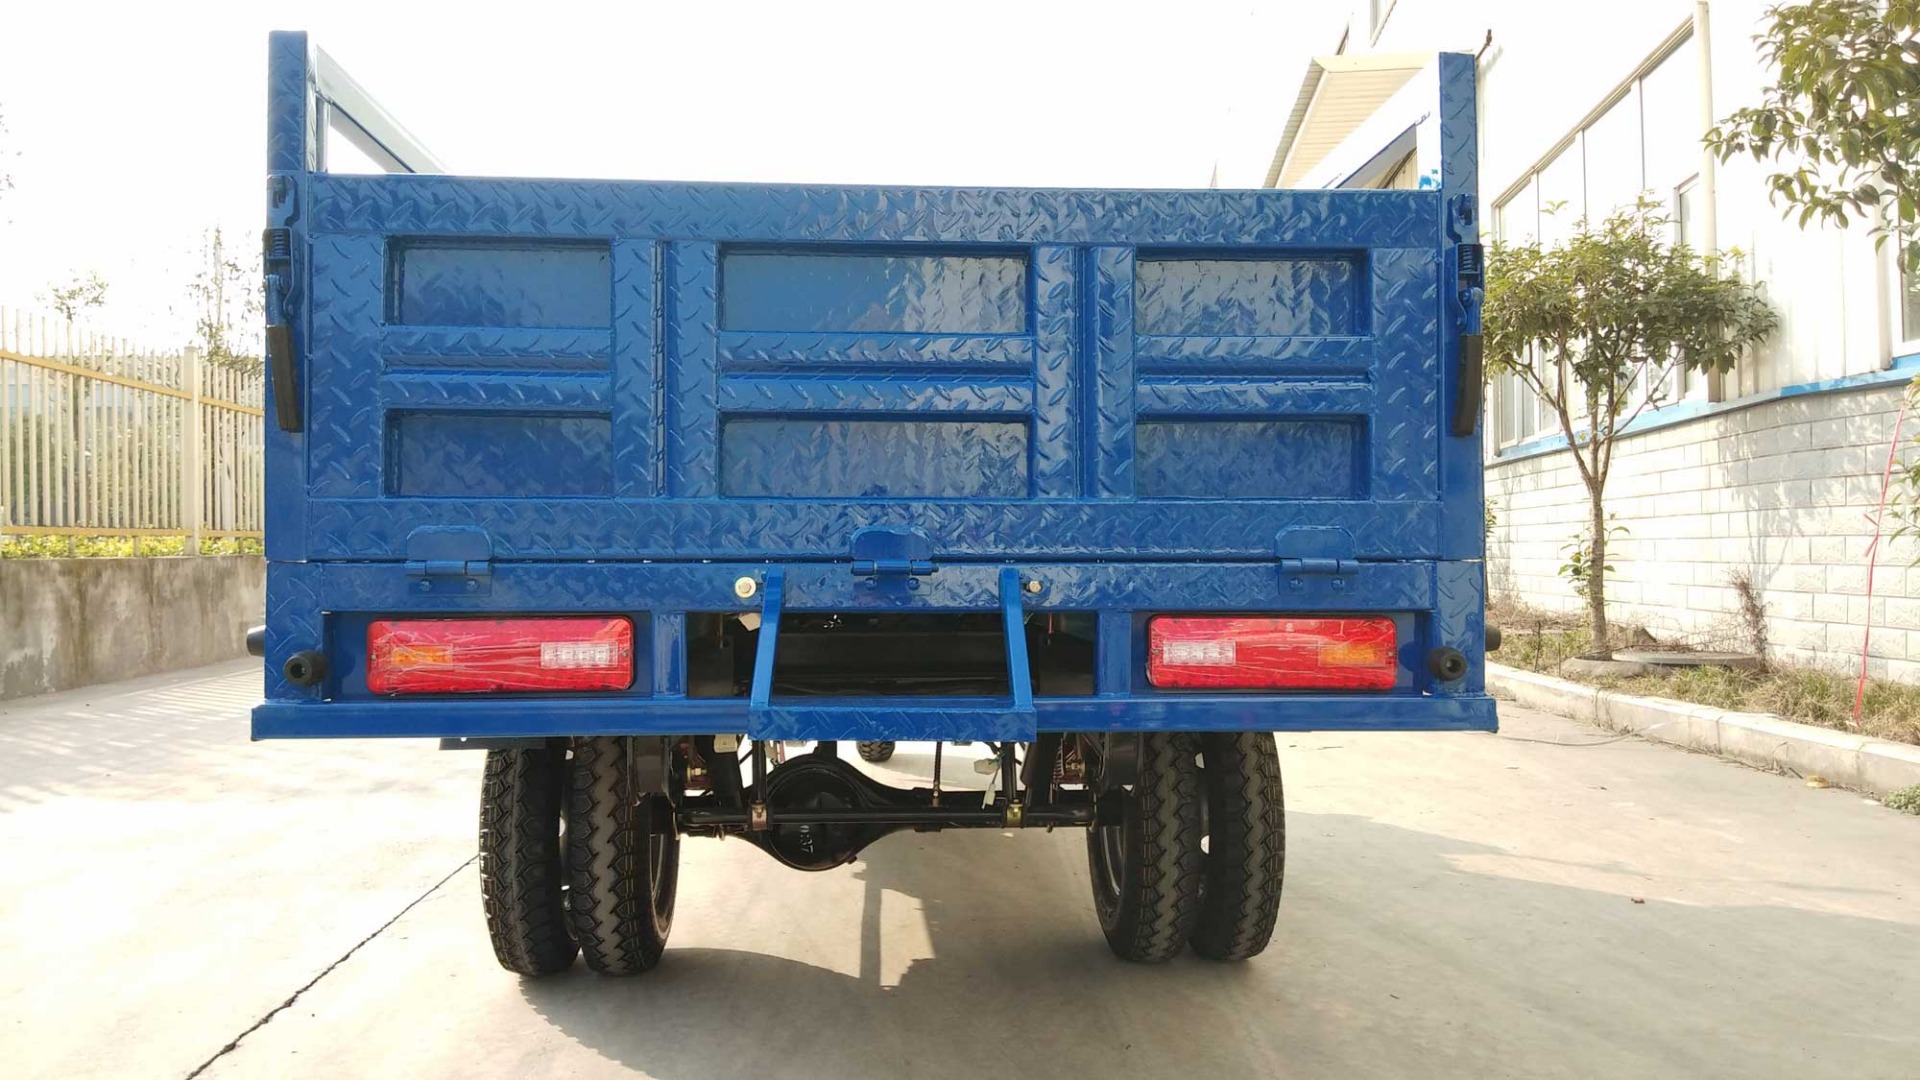 Heavy loading truck transport tricycle frame with motor price motorized tricycles China Max blue body power engine cool